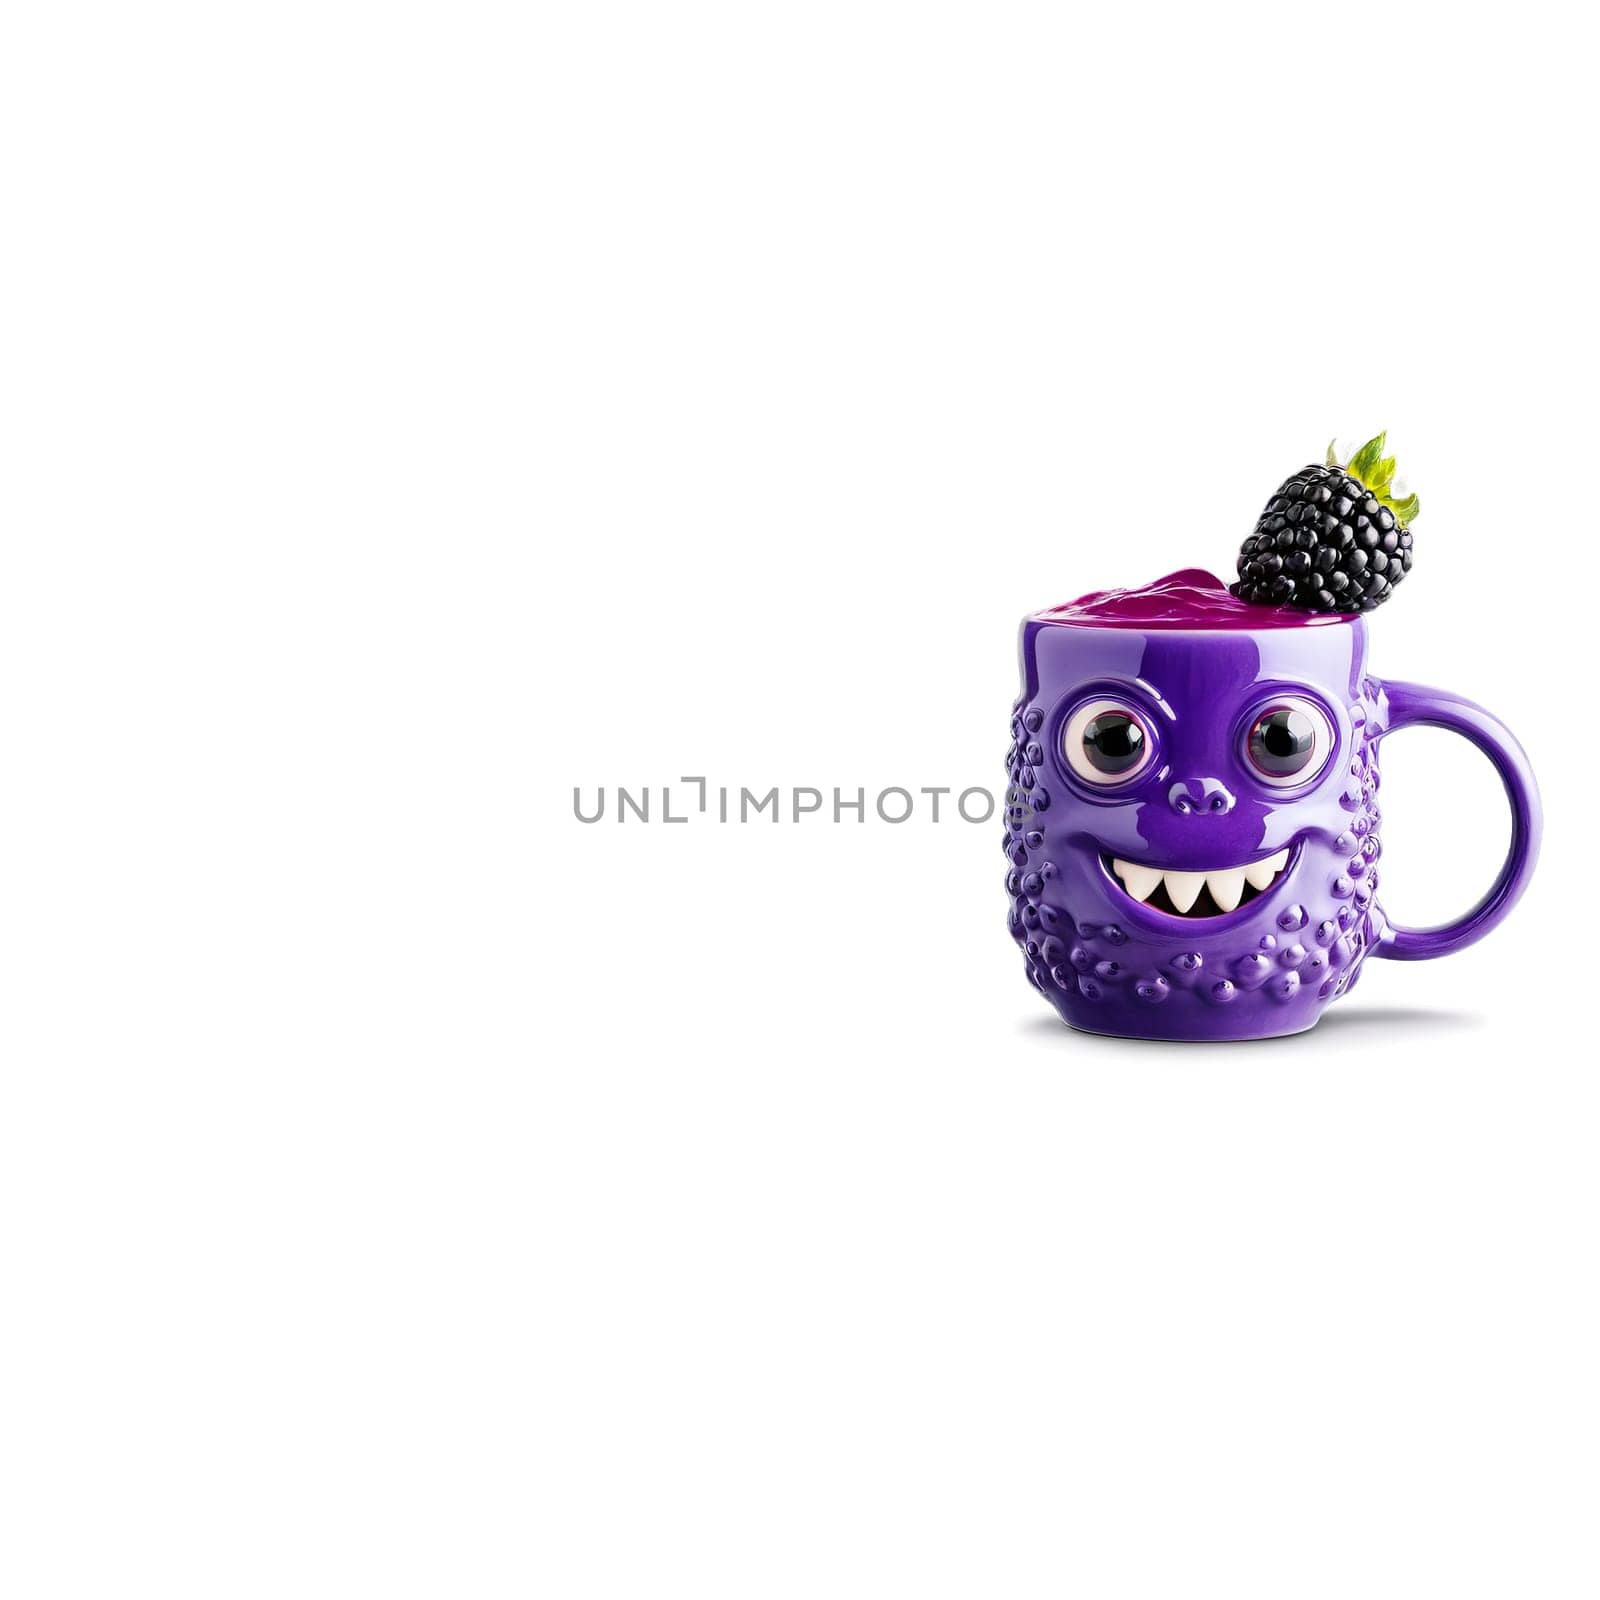 Quirky monster shaped ceramic mug with a vibrant purple glaze filled with a creamy blackberry by panophotograph